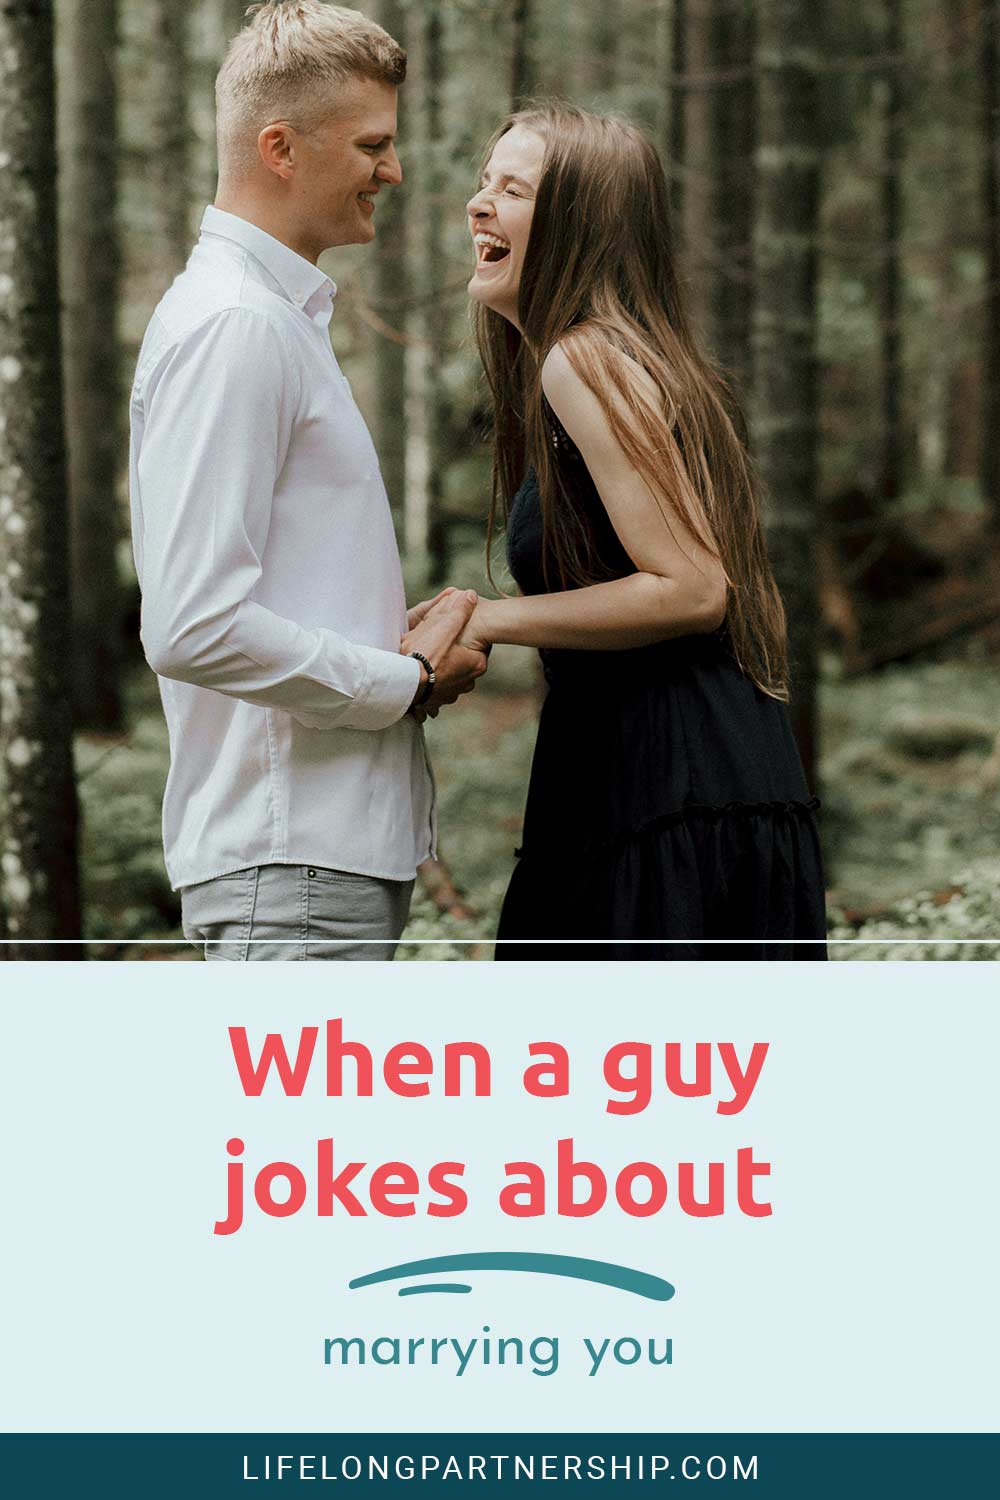 Man and woman laughing holding hands - When a guy jokes about marrying you.